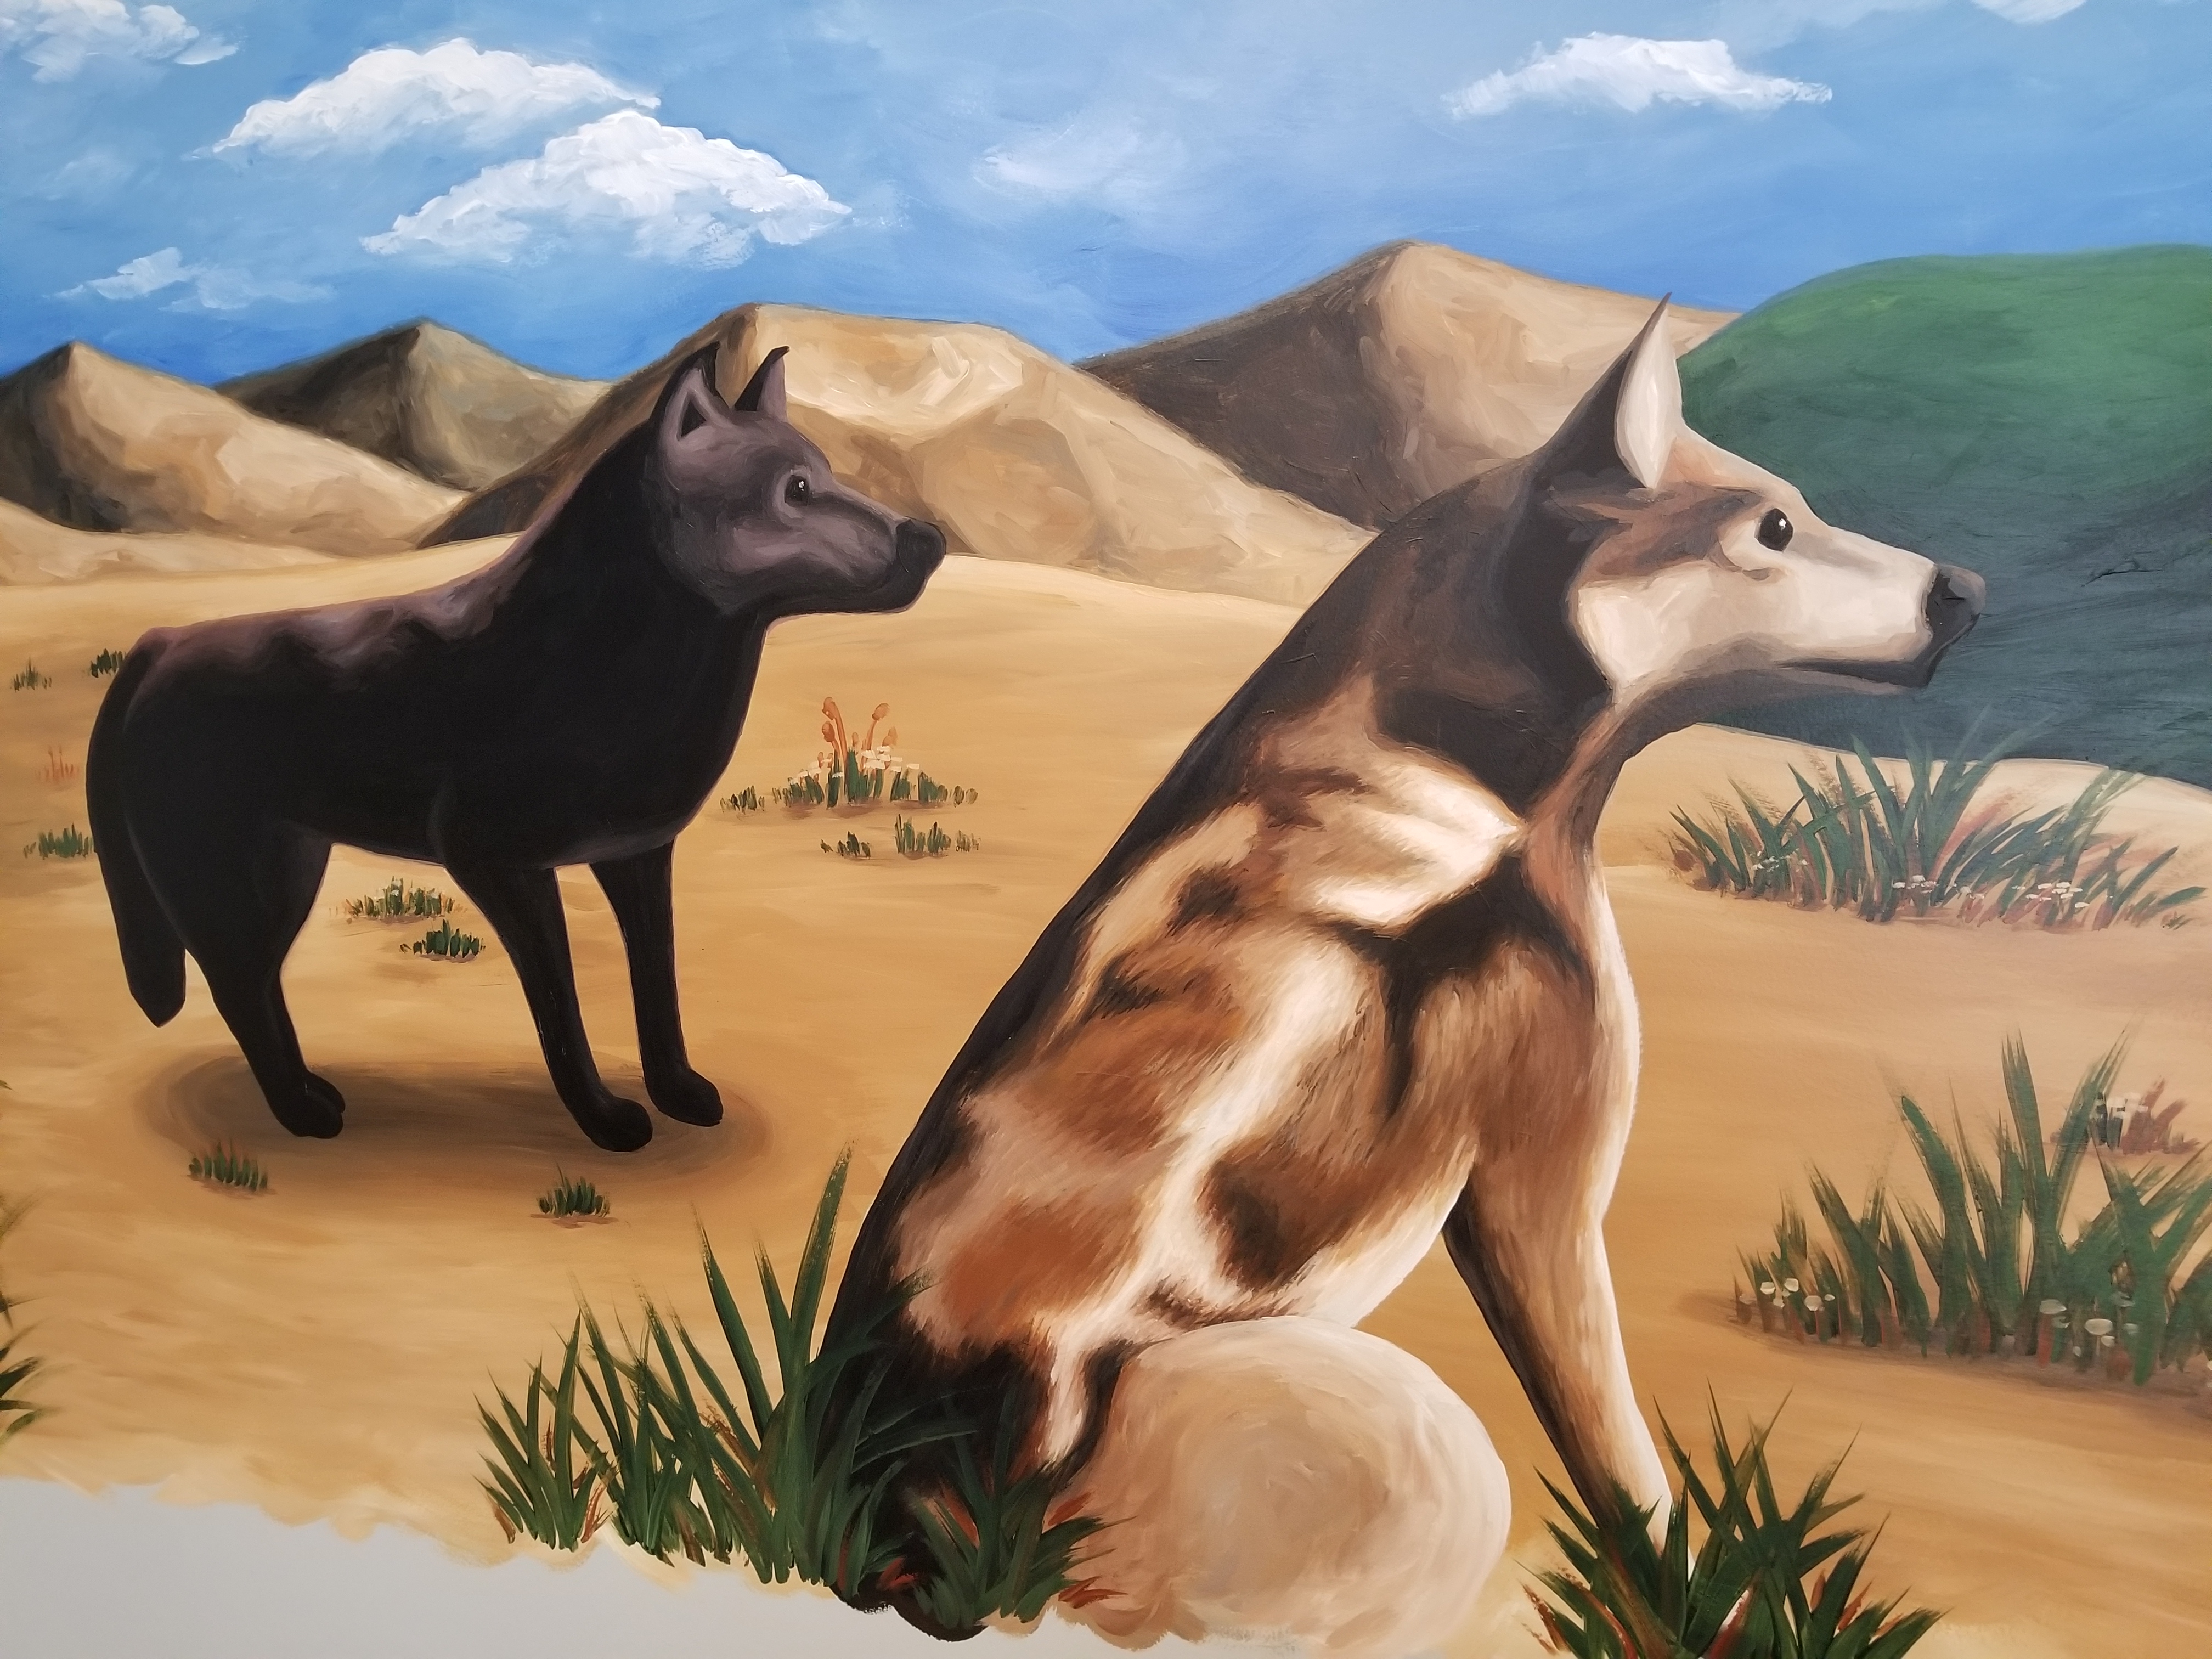 A closeup on the previous mural showing just the two wolves. The black wolf is standing while looking out to the right, while the brown and white wolf is sitting. Both are surrounded by small plants and flowers poking through the sand.